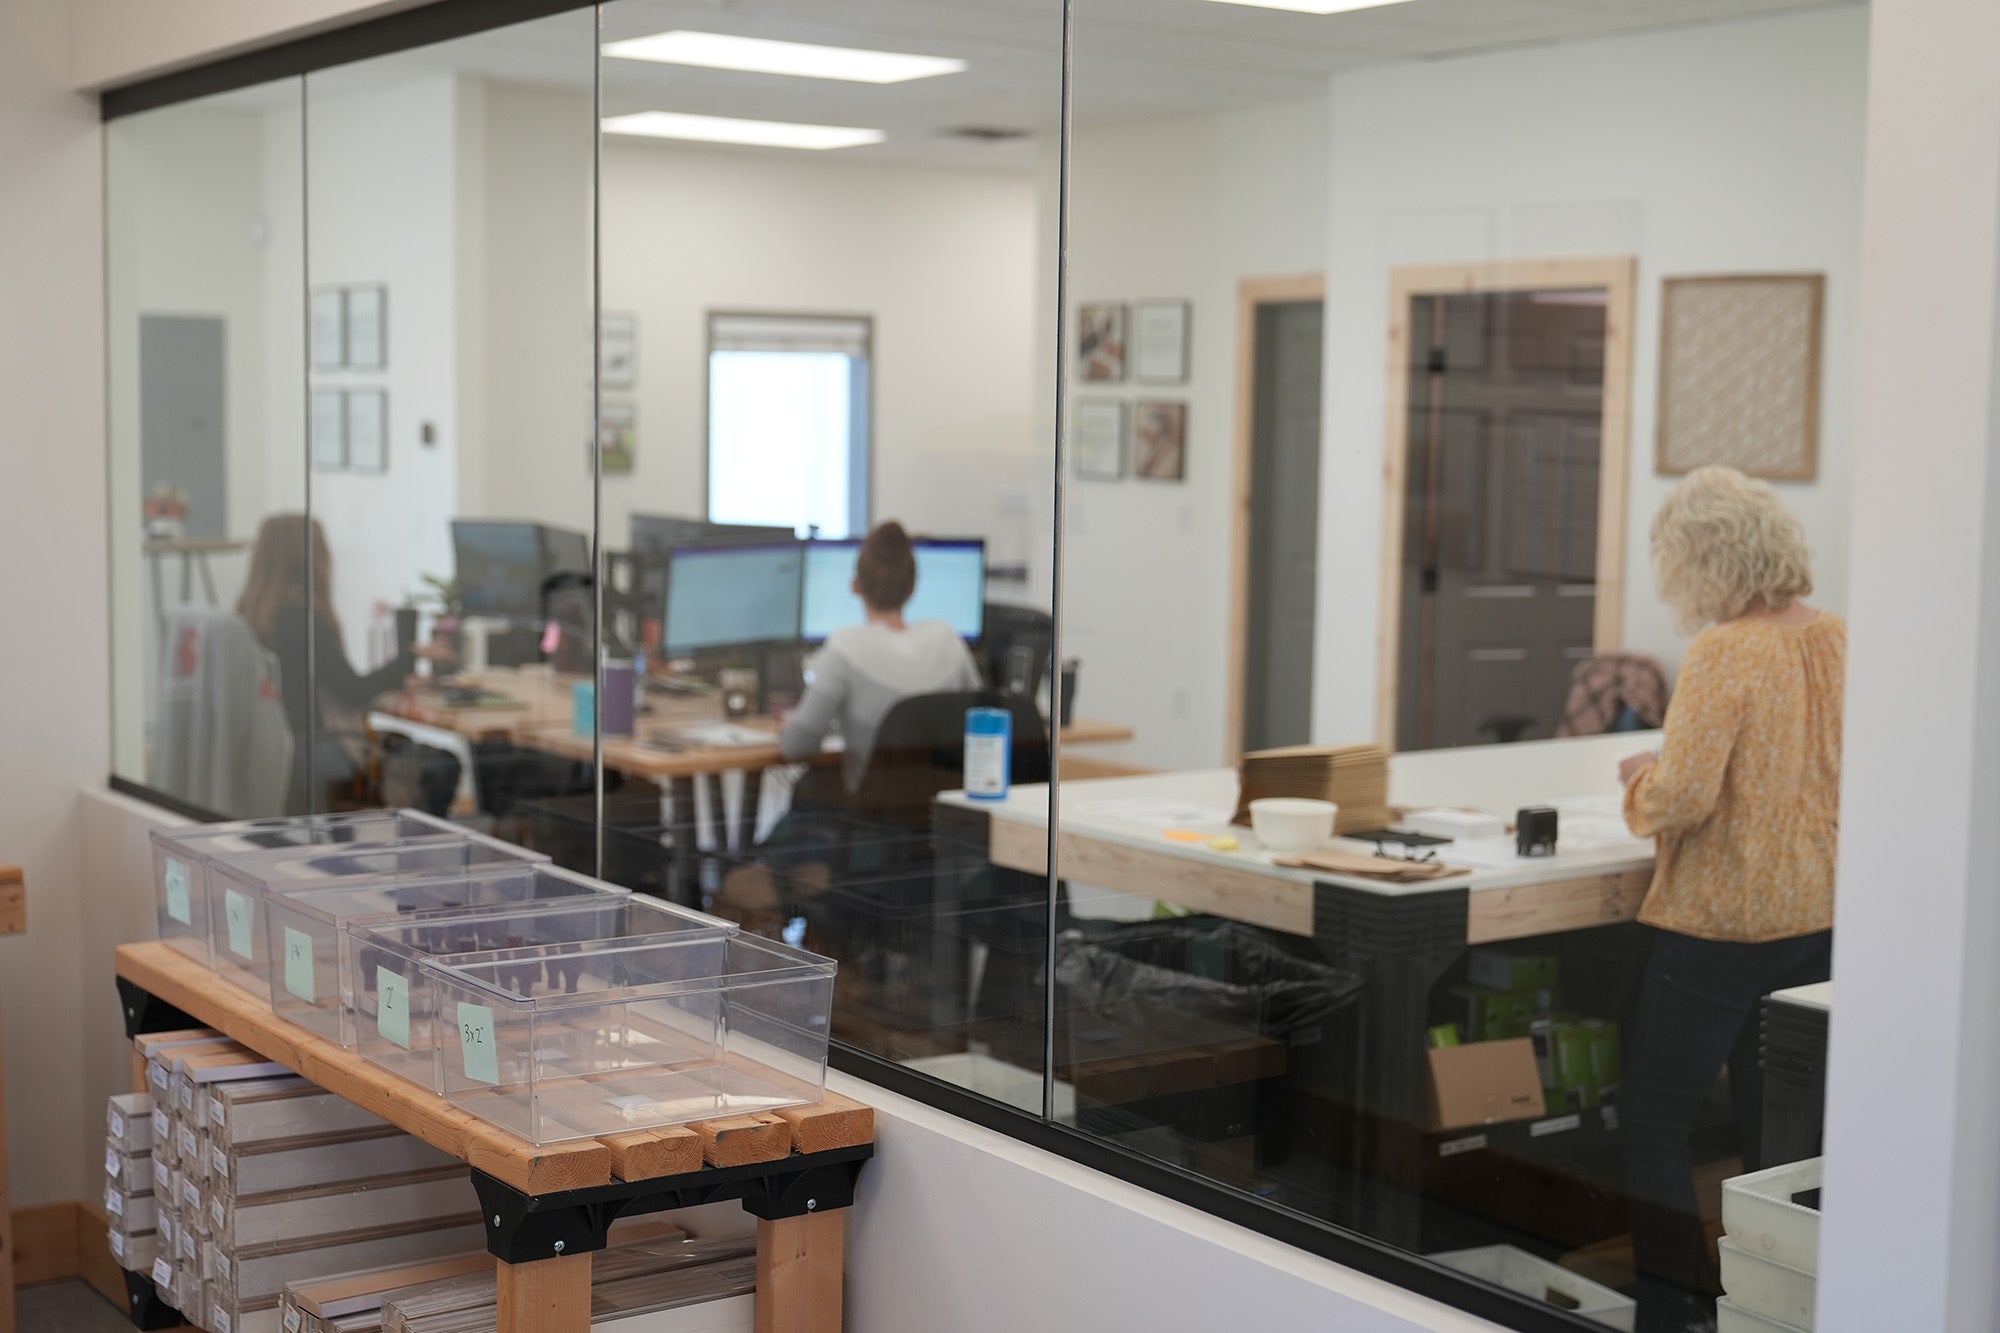 View through a glass partition of a bustling custom rubber stamp workshop with workers focused on their tasks crafting materials on desks and organized storage bins in the foreground